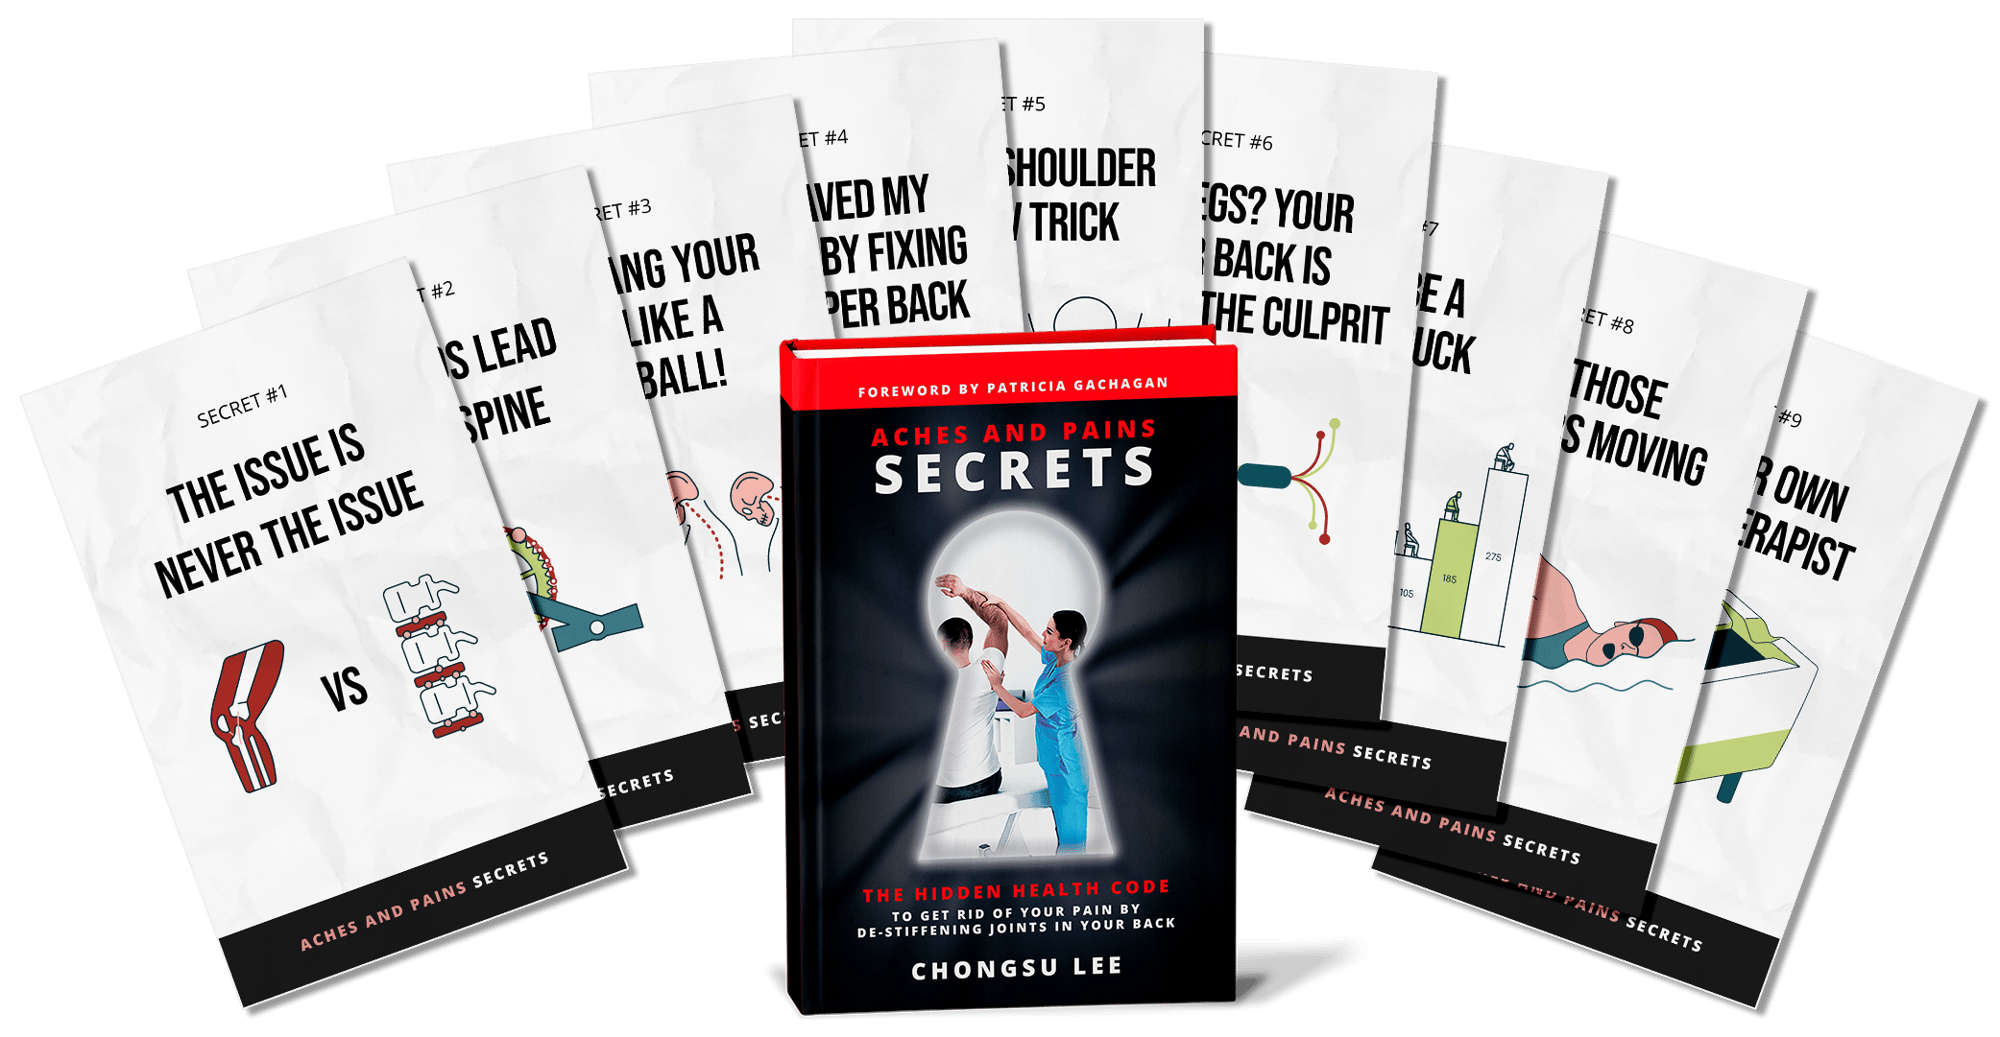 Aches and Pains Secrets - All pages + Cover - Mock up